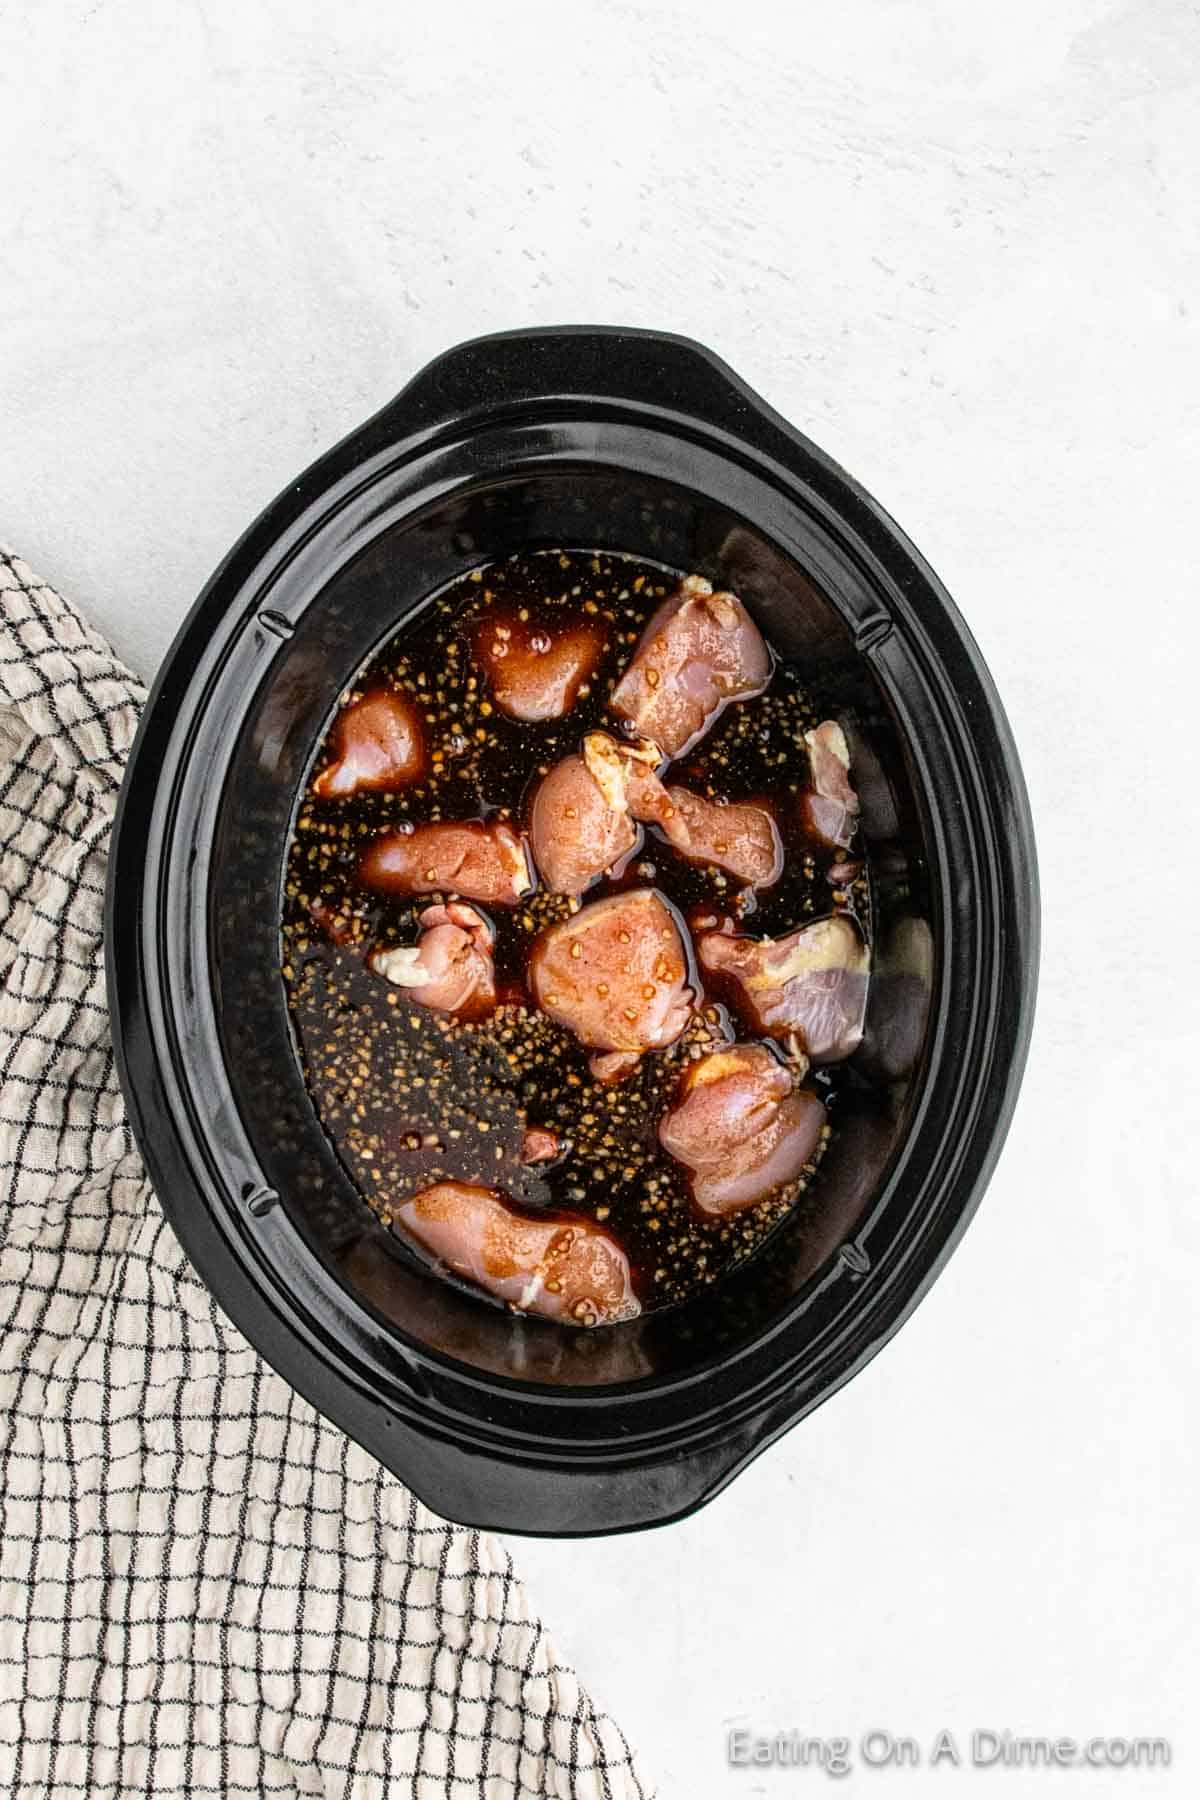 Chicken thighs in a slow cooker topped with the soy sauce mixture